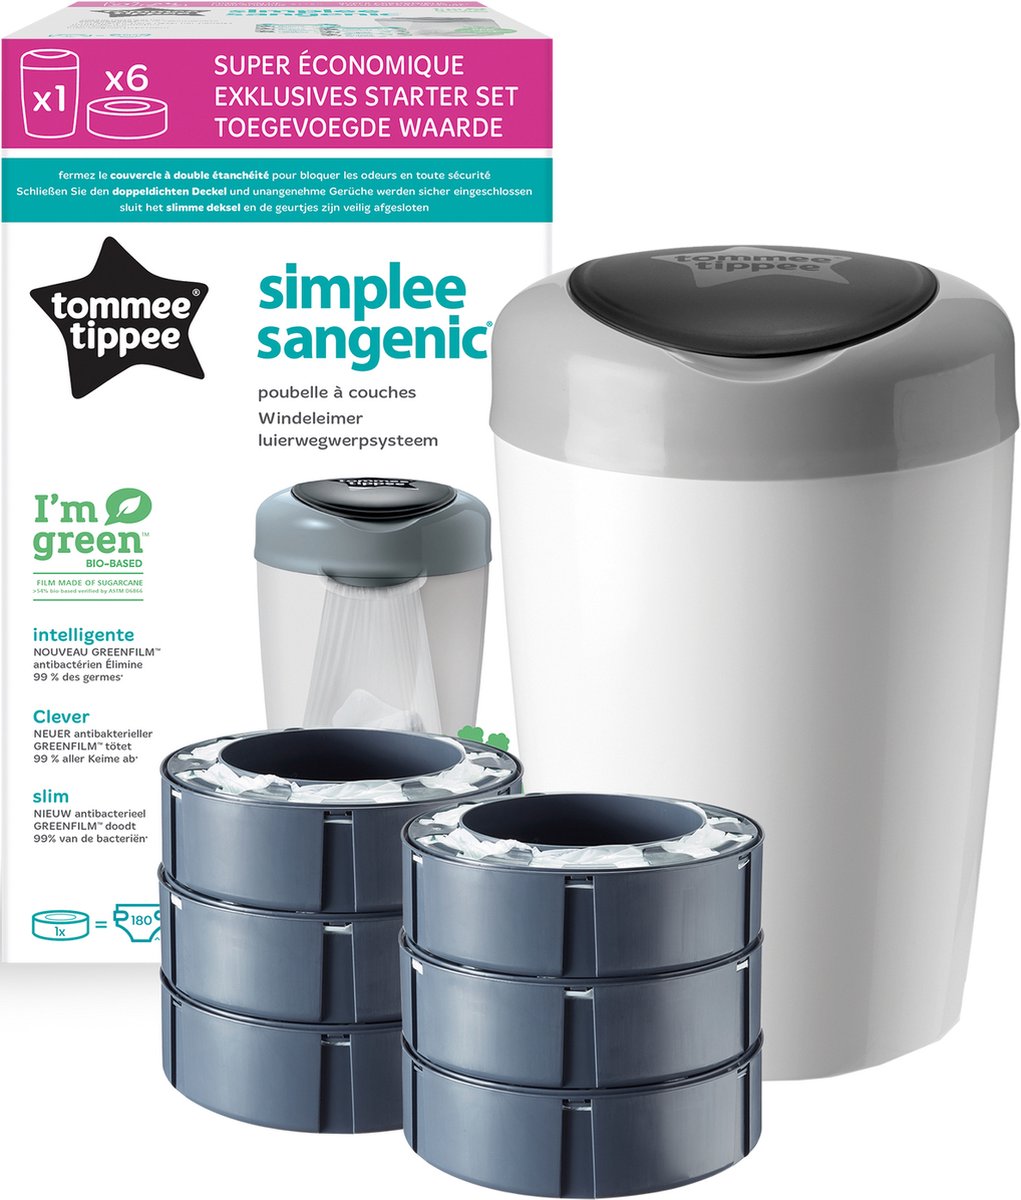 Tommee Tippee Simplee Sangenic Starter Set Seau à couches + 6 recharges -  Wit | bol